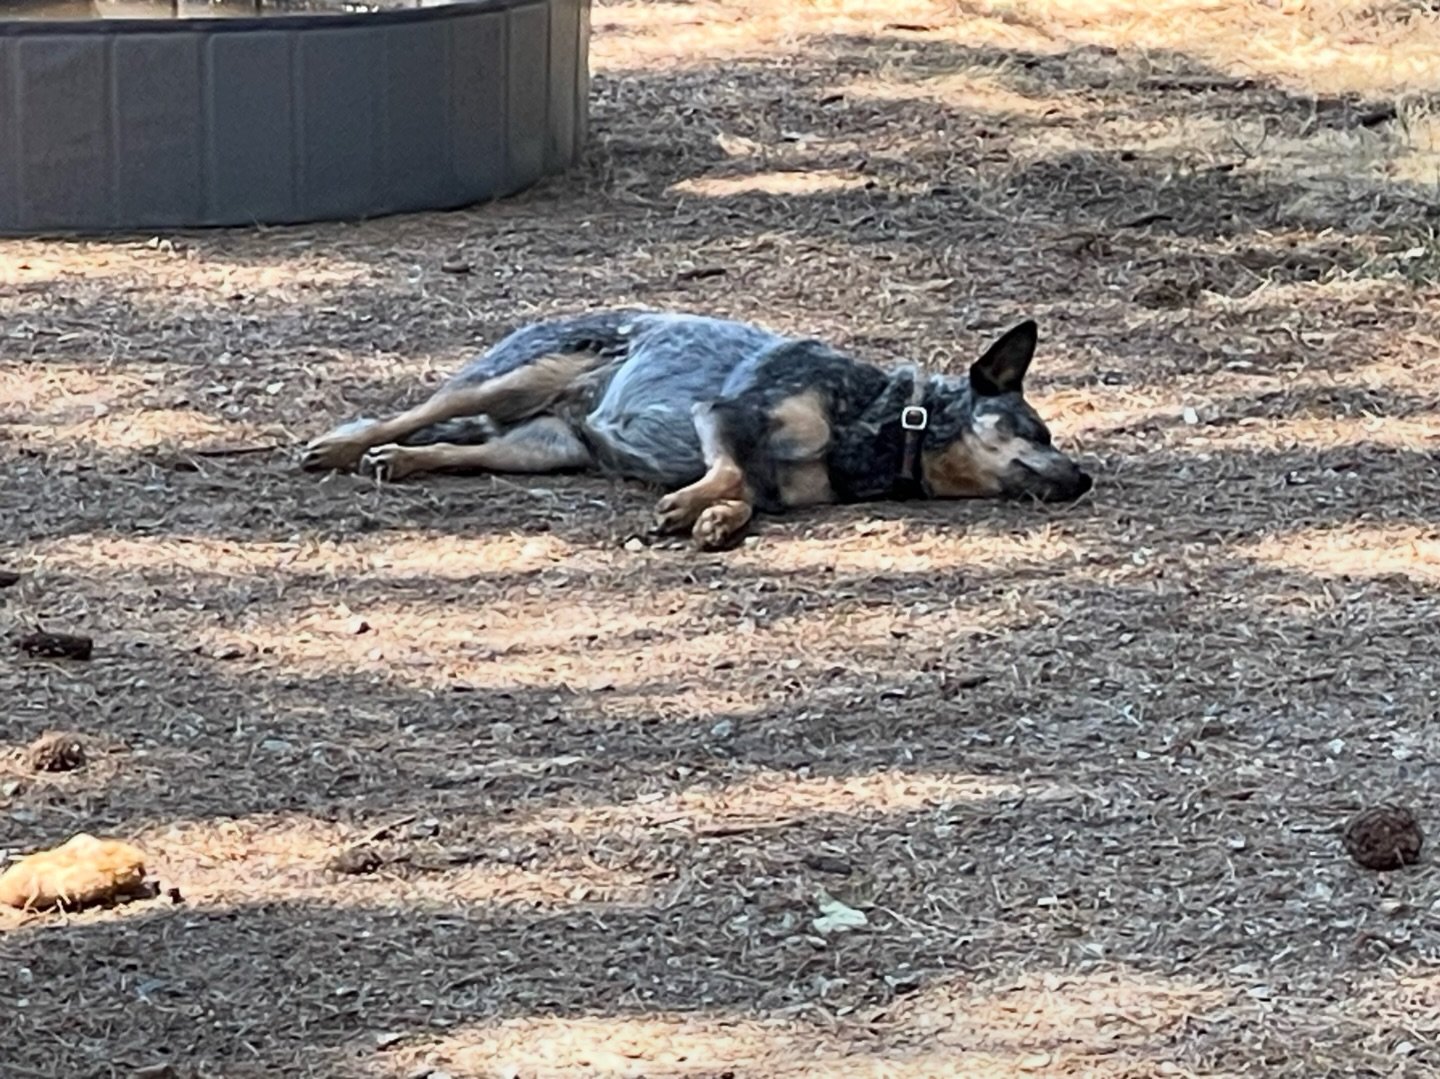 Sometimes you have too much DWR fun, playing too hard and just need to nap in the middle of the yard😂🐾
🐶Annie, 4 year old Australian Cattle Dog from Cool, CA
.
.
.
#dogboarding #dogdaycare #australiancattledog